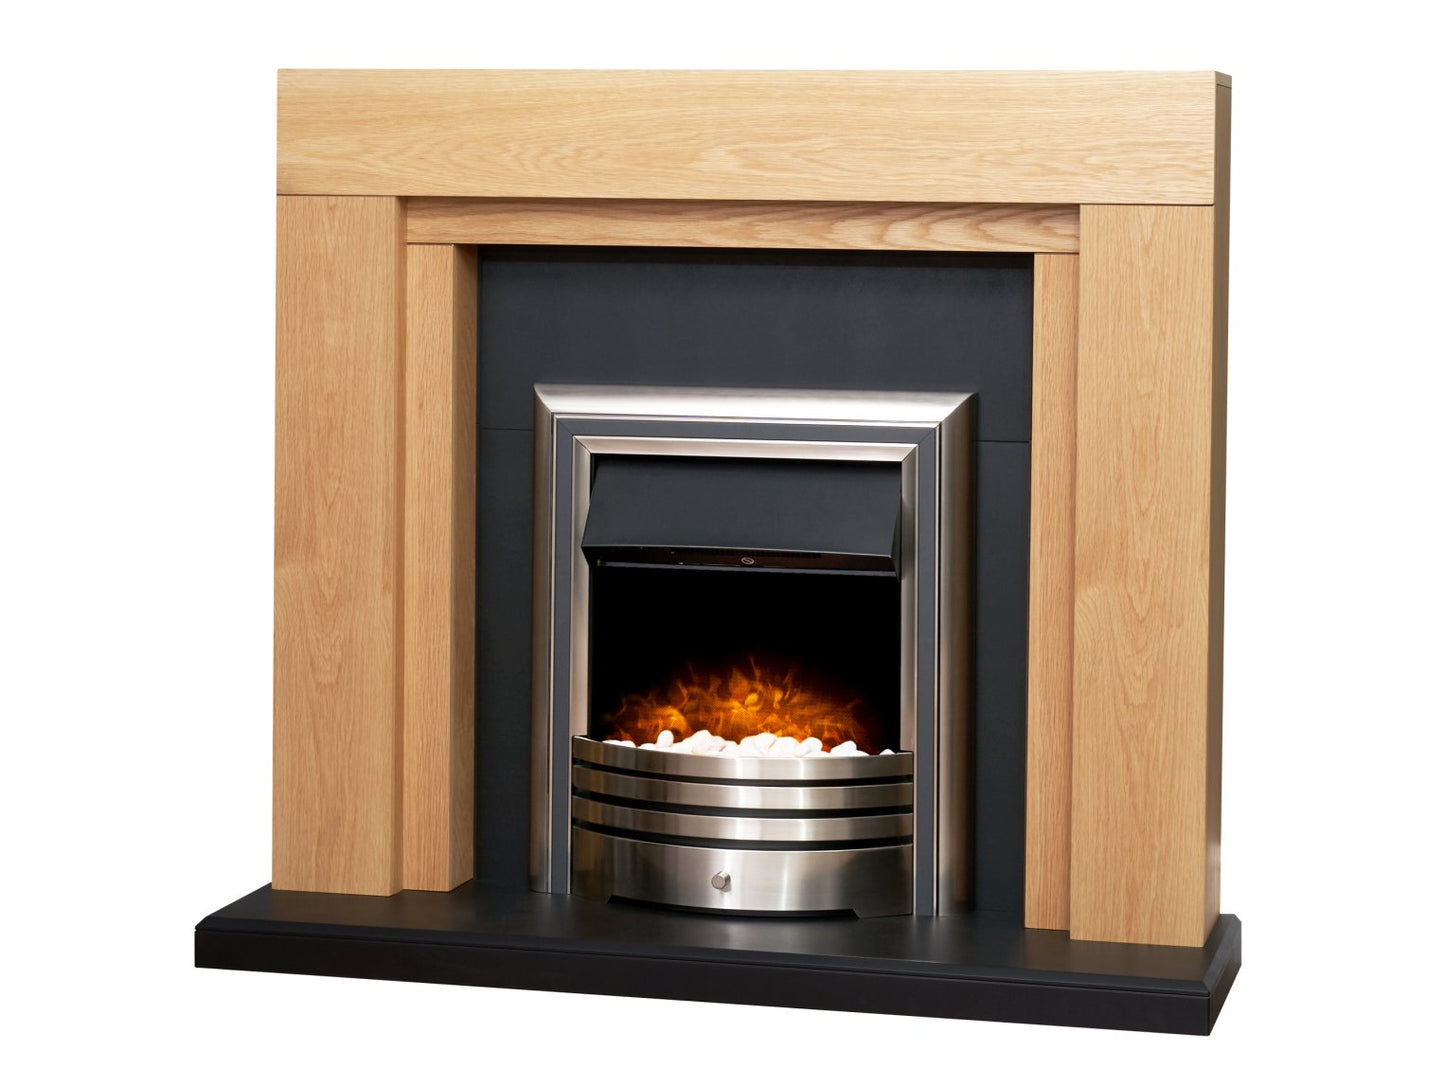 Adam Beaumont Oak & Black Fireplace + Downlights & Astralis 6-in-1 Electric Fire Chrome, 48"